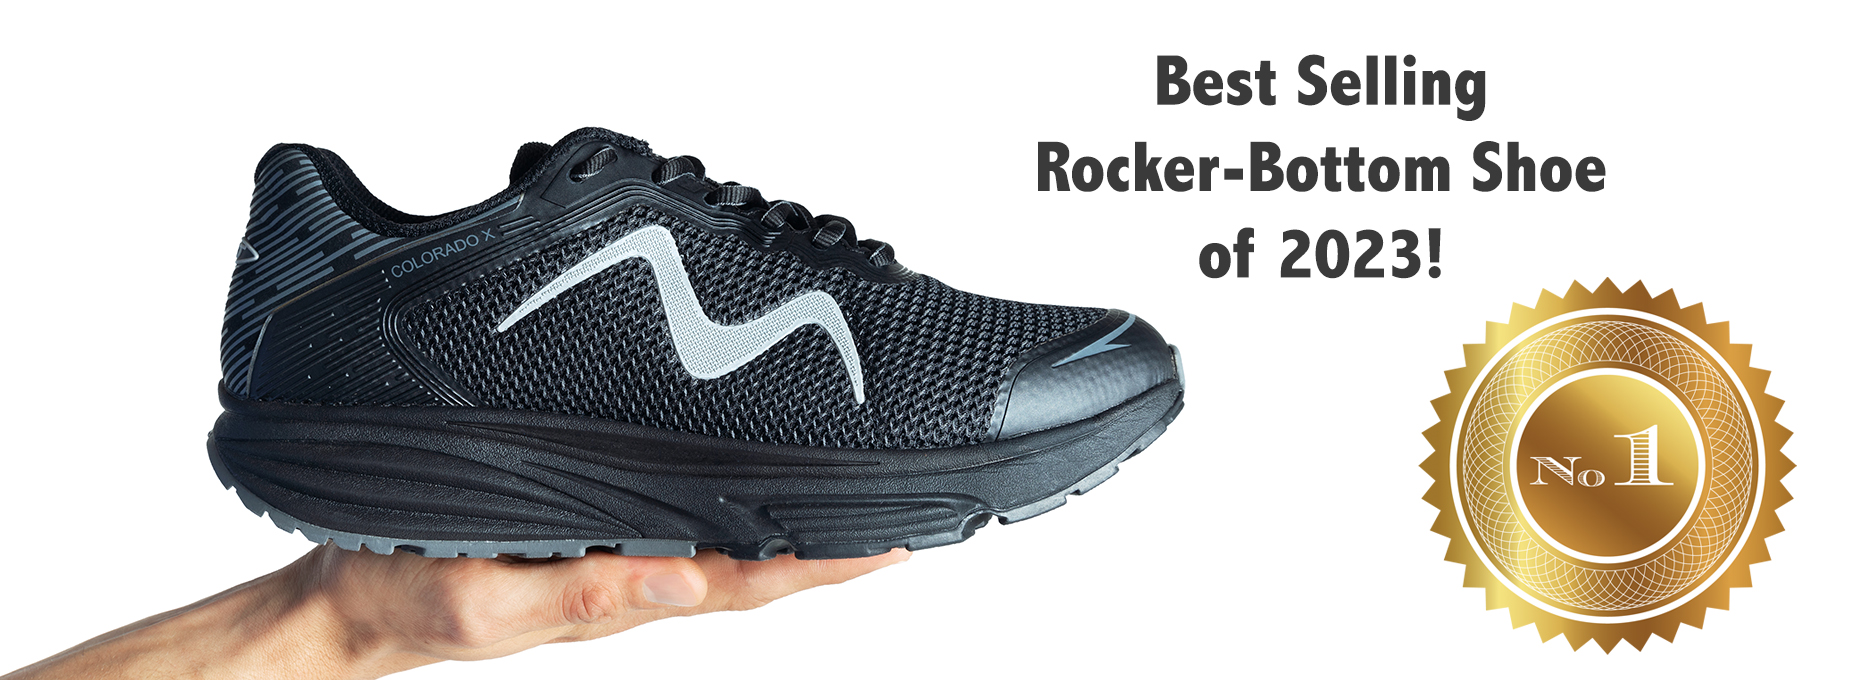 The Colorado X Is The Best Selling Rocker Bottom Shoe of The Year 2023